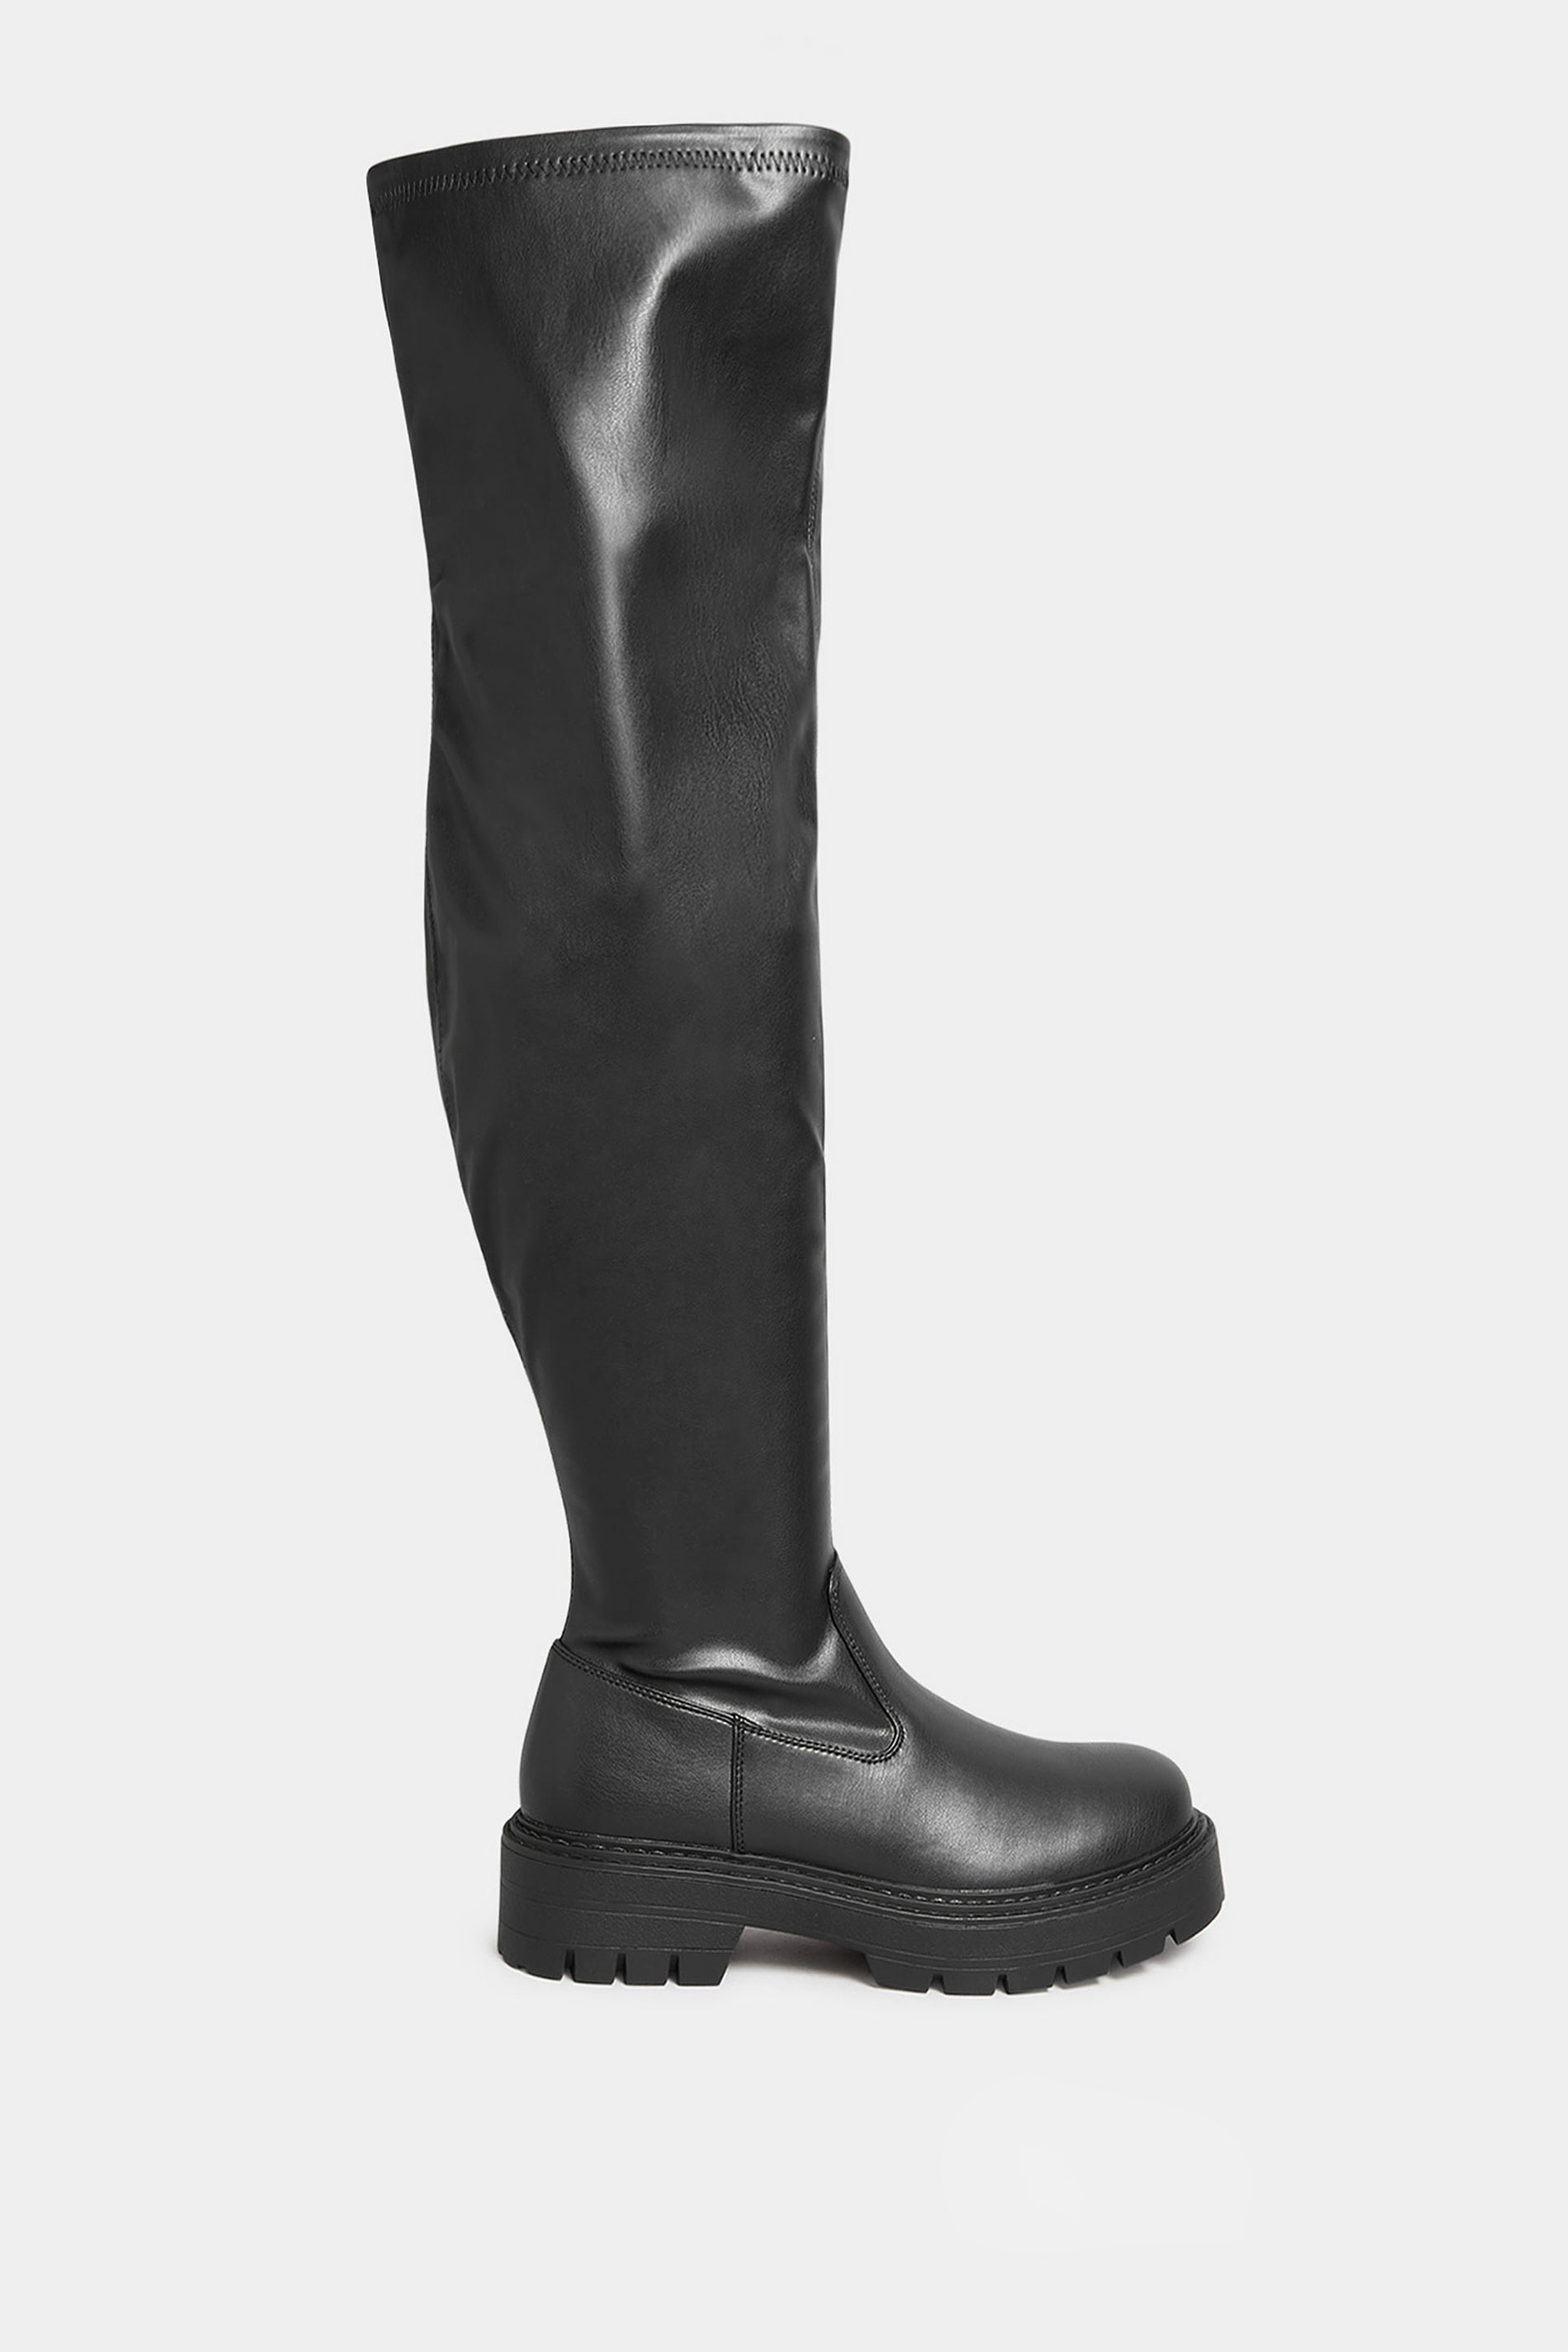 LIMITED COLLECTION Black Over The Knee Chunky Boots In Wide & Extra Wide Fit | Yours Clothing 3